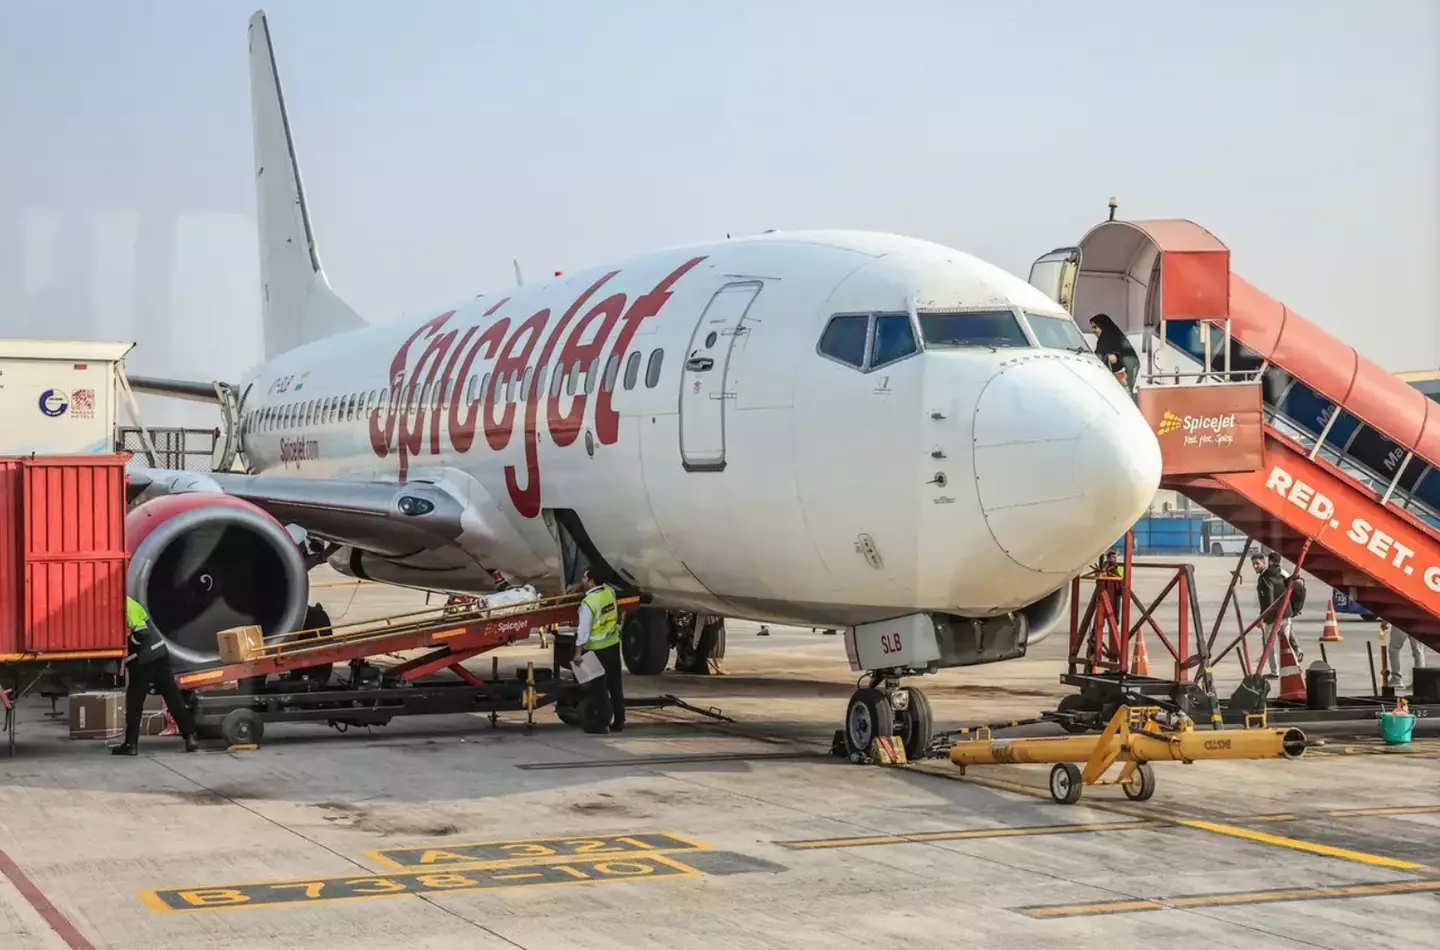 SpiceJet has apologized for the incident.